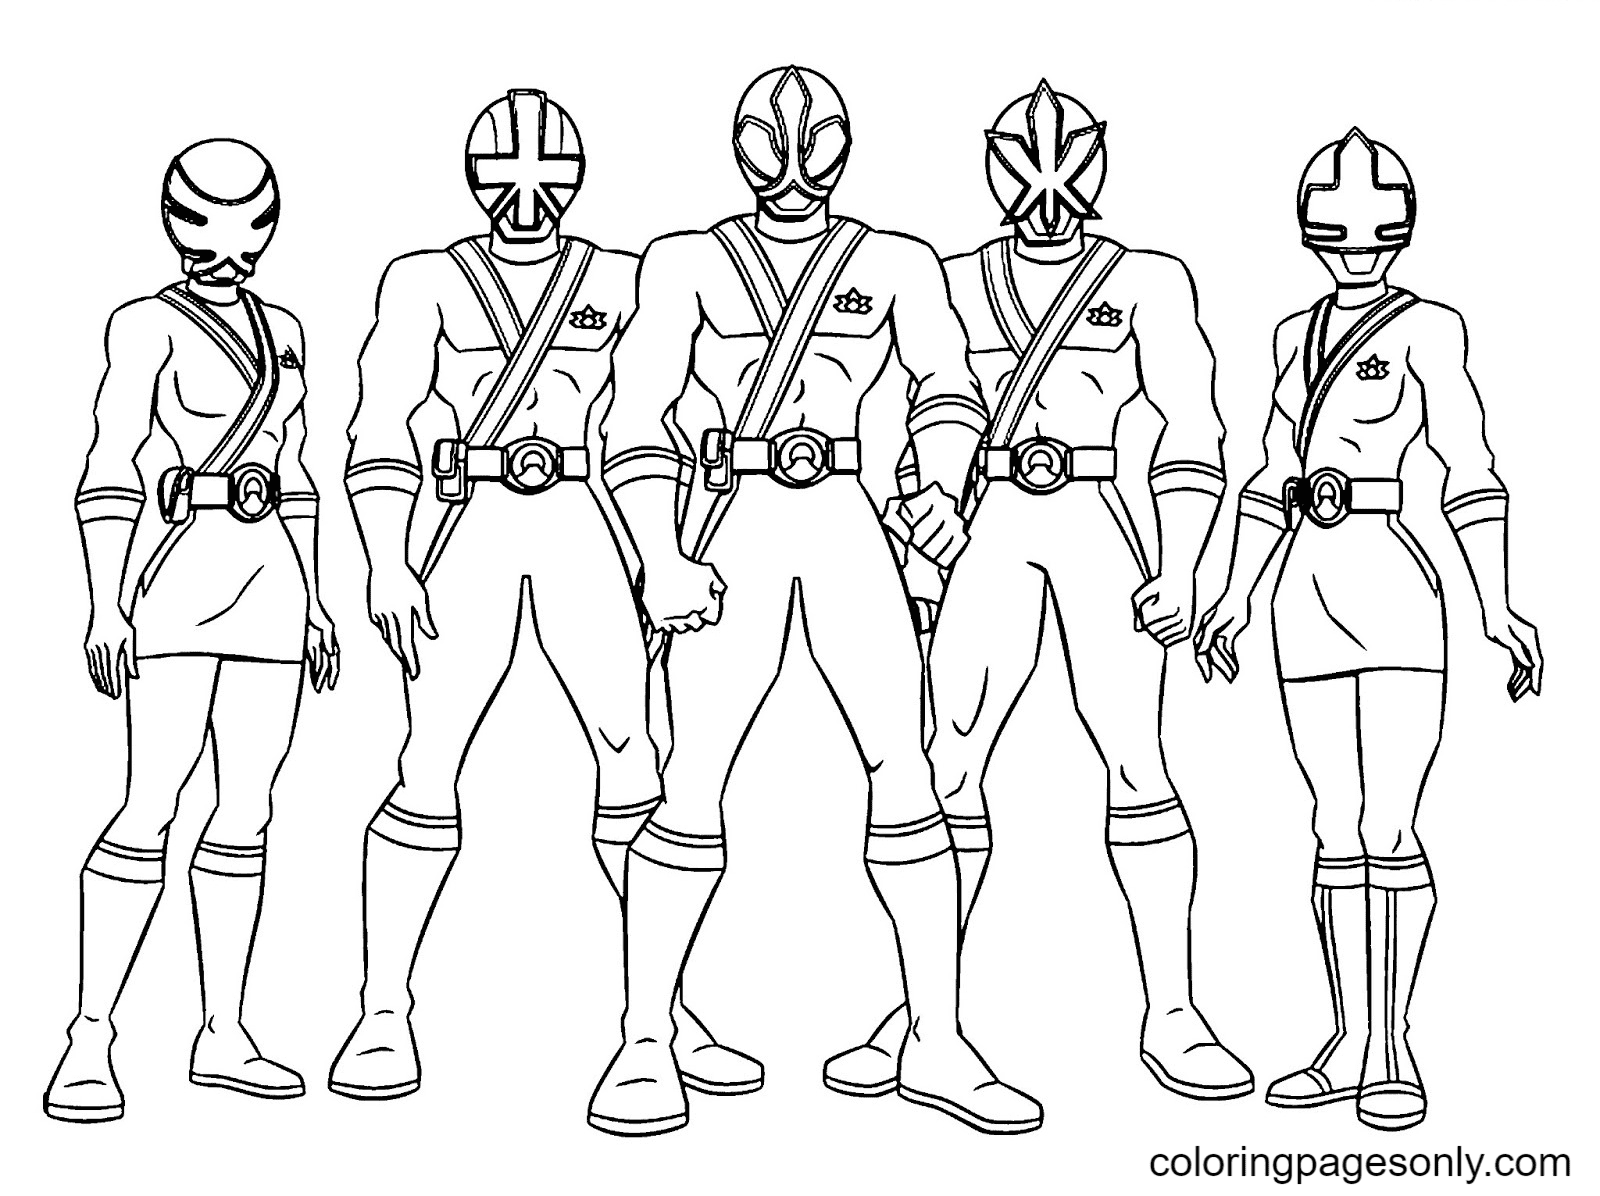 Group of Power Rangers Coloring Pages - Power Rangers Coloring Pages - Coloring  Pages For Kids And Adults